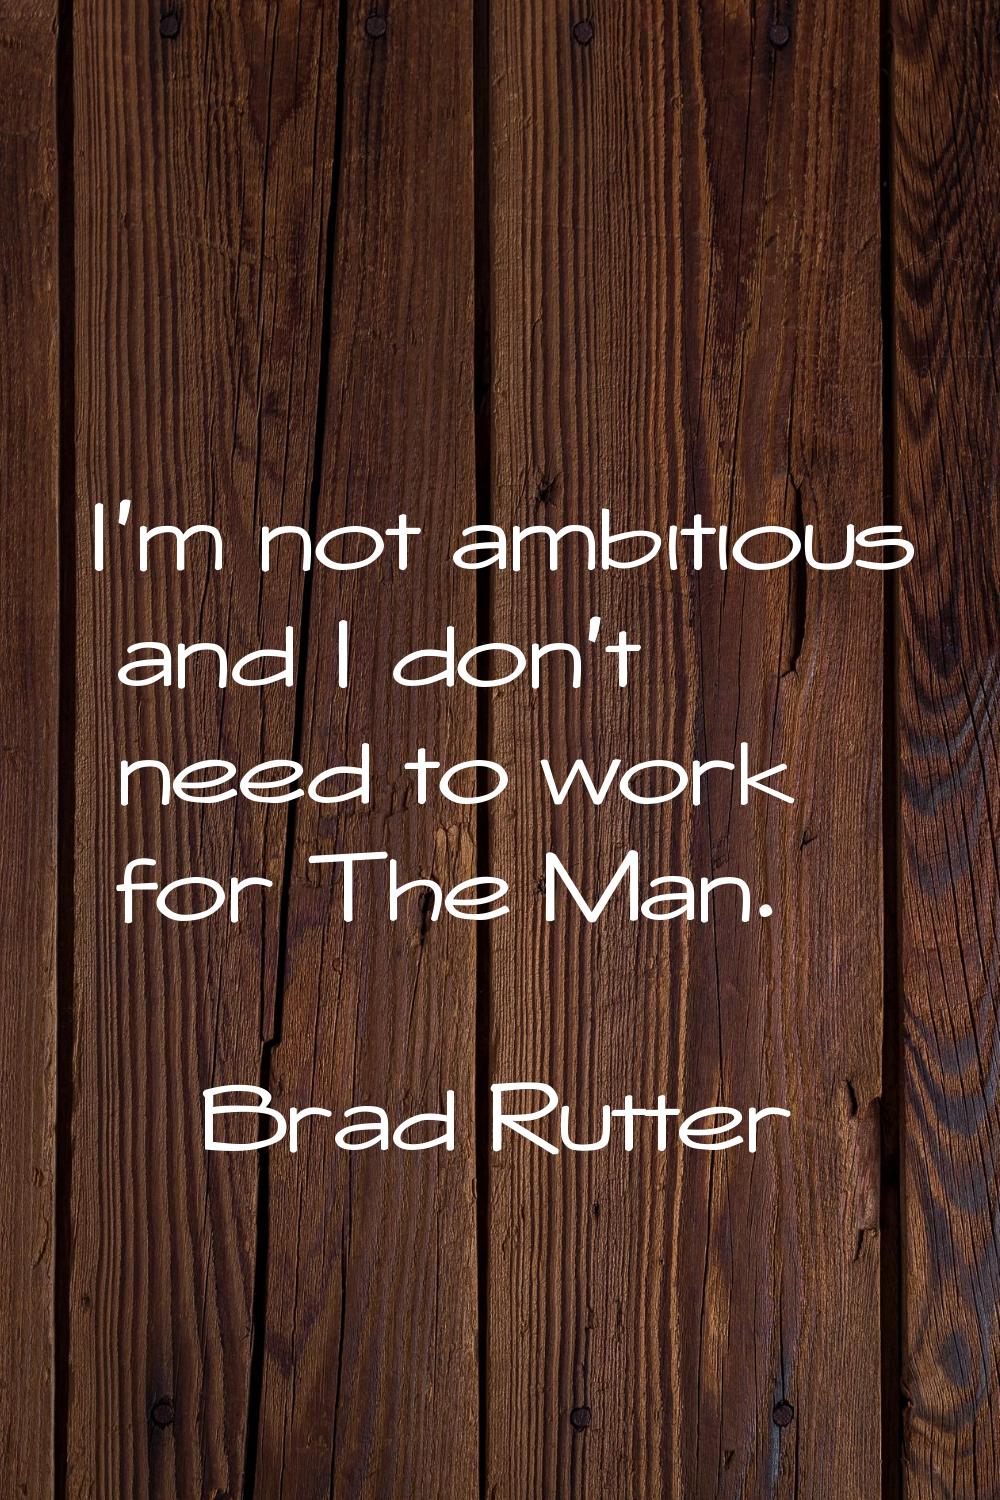 I'm not ambitious and I don't need to work for The Man.